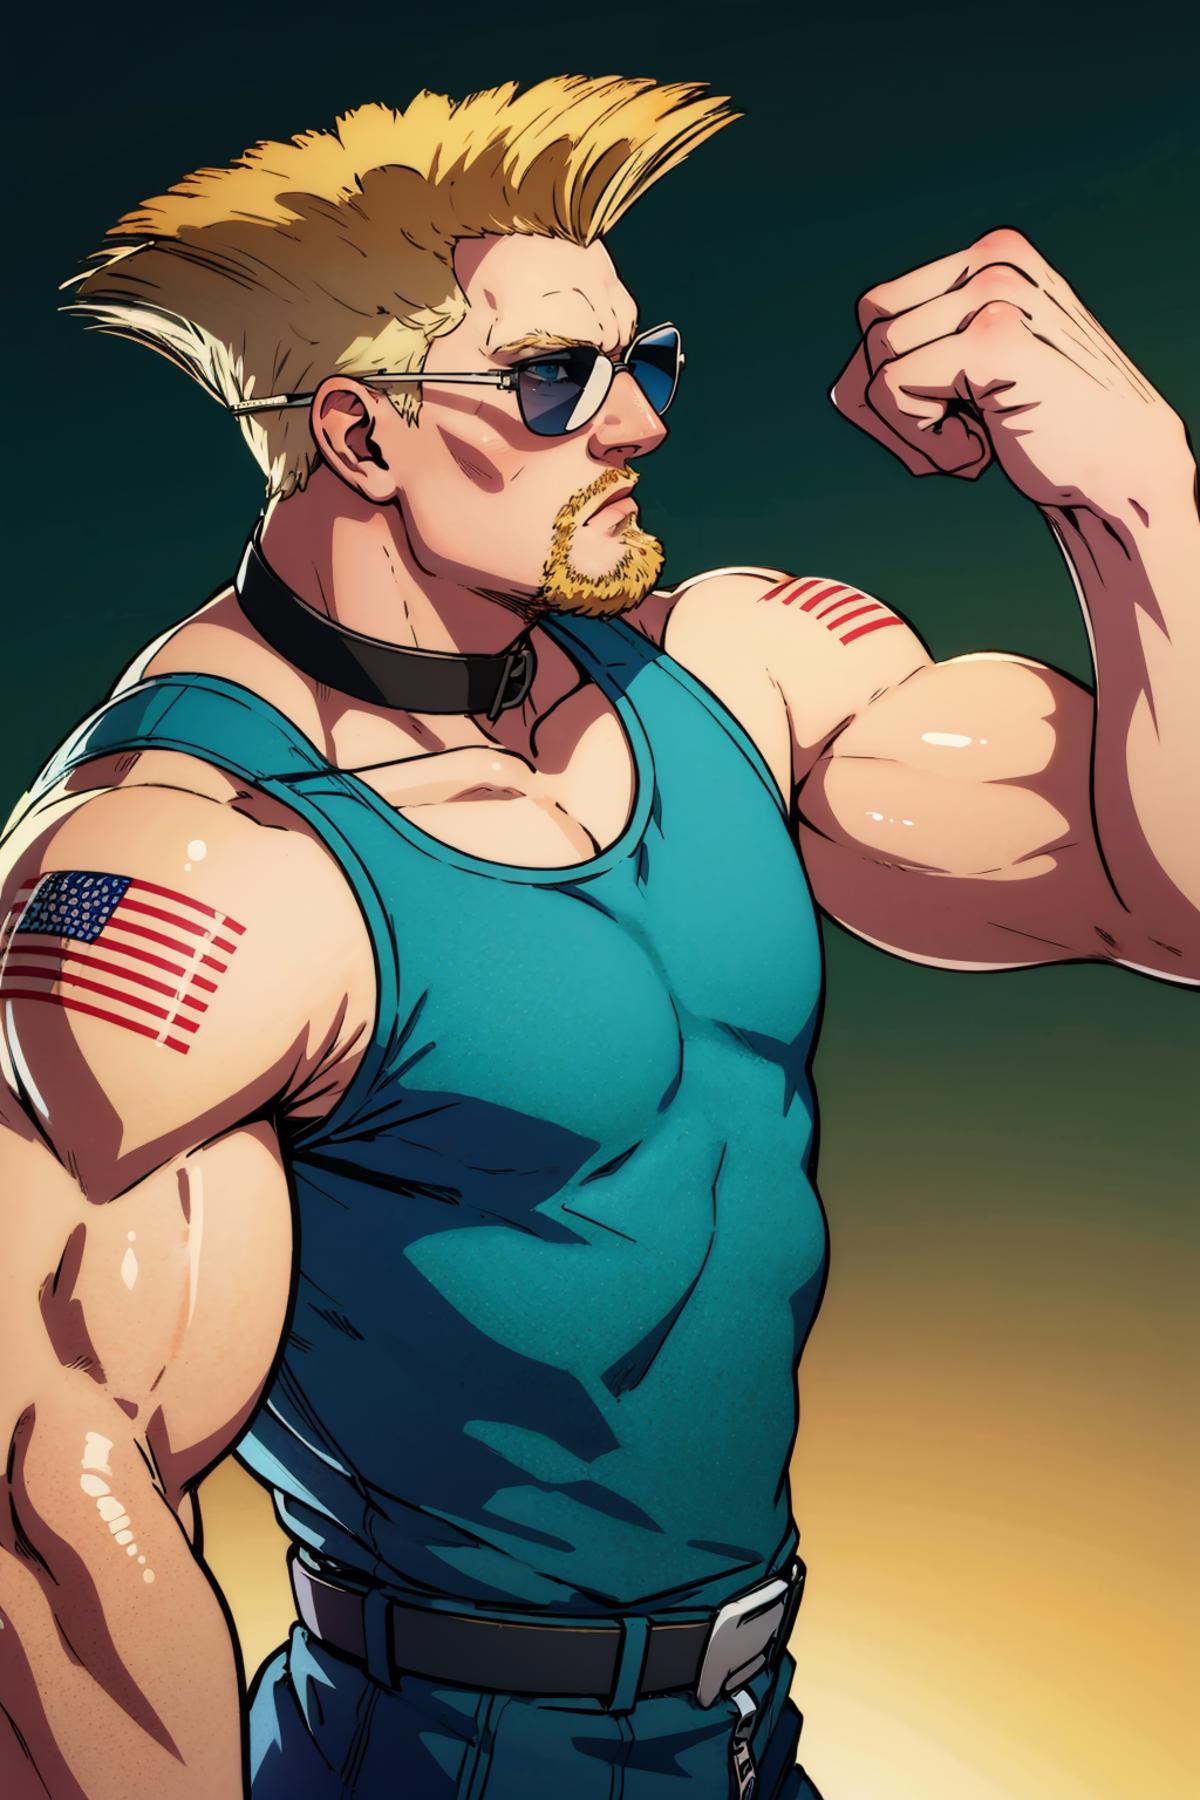 Guile - Street Fighter (SF6) image by novowels